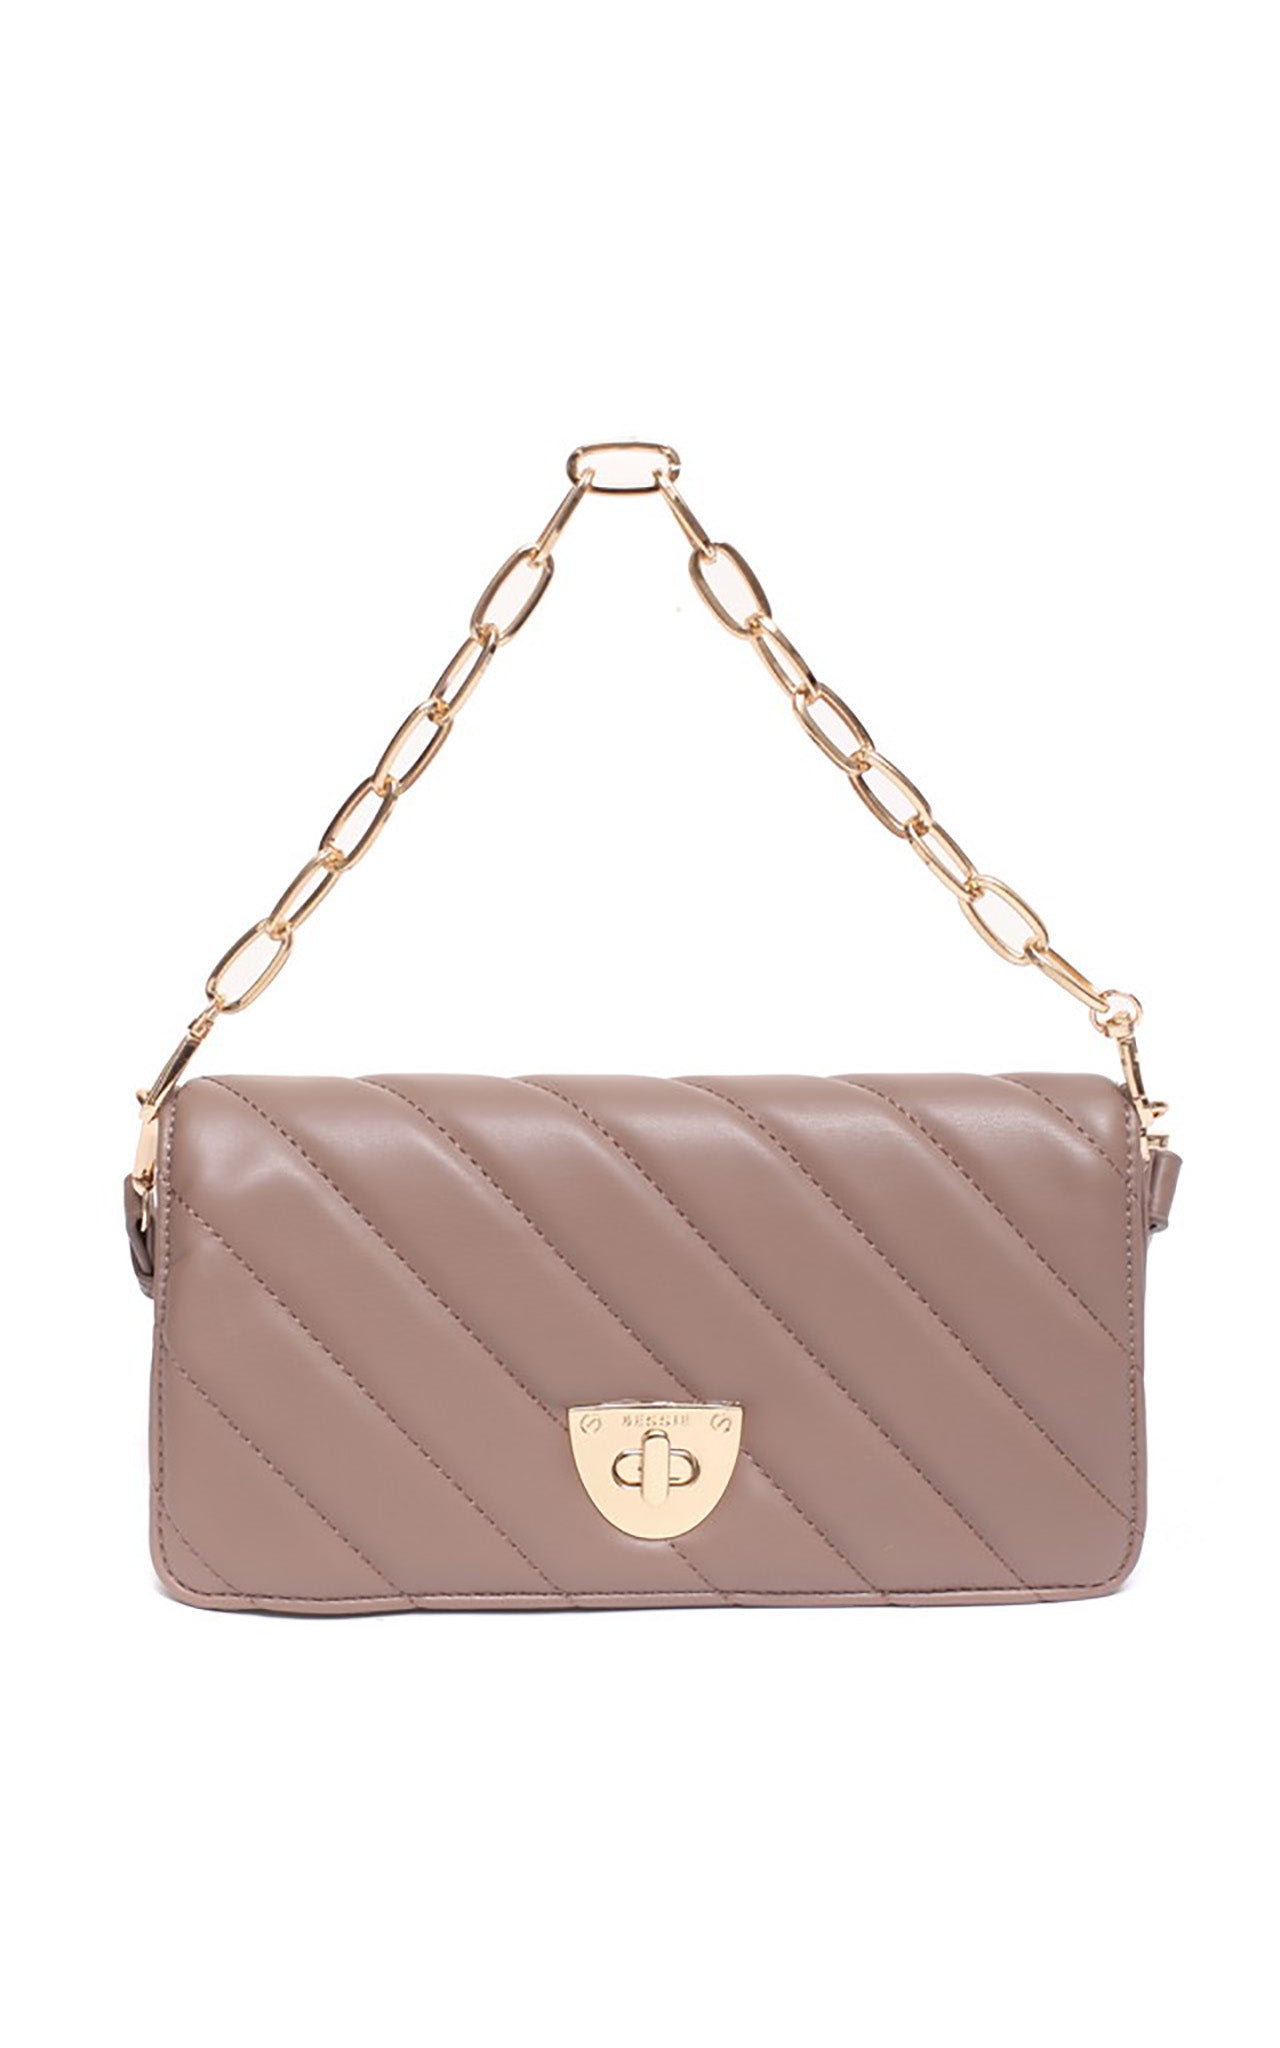 Quilted Ring Chained Shoulder Bag Tan, BESSIE LONDON